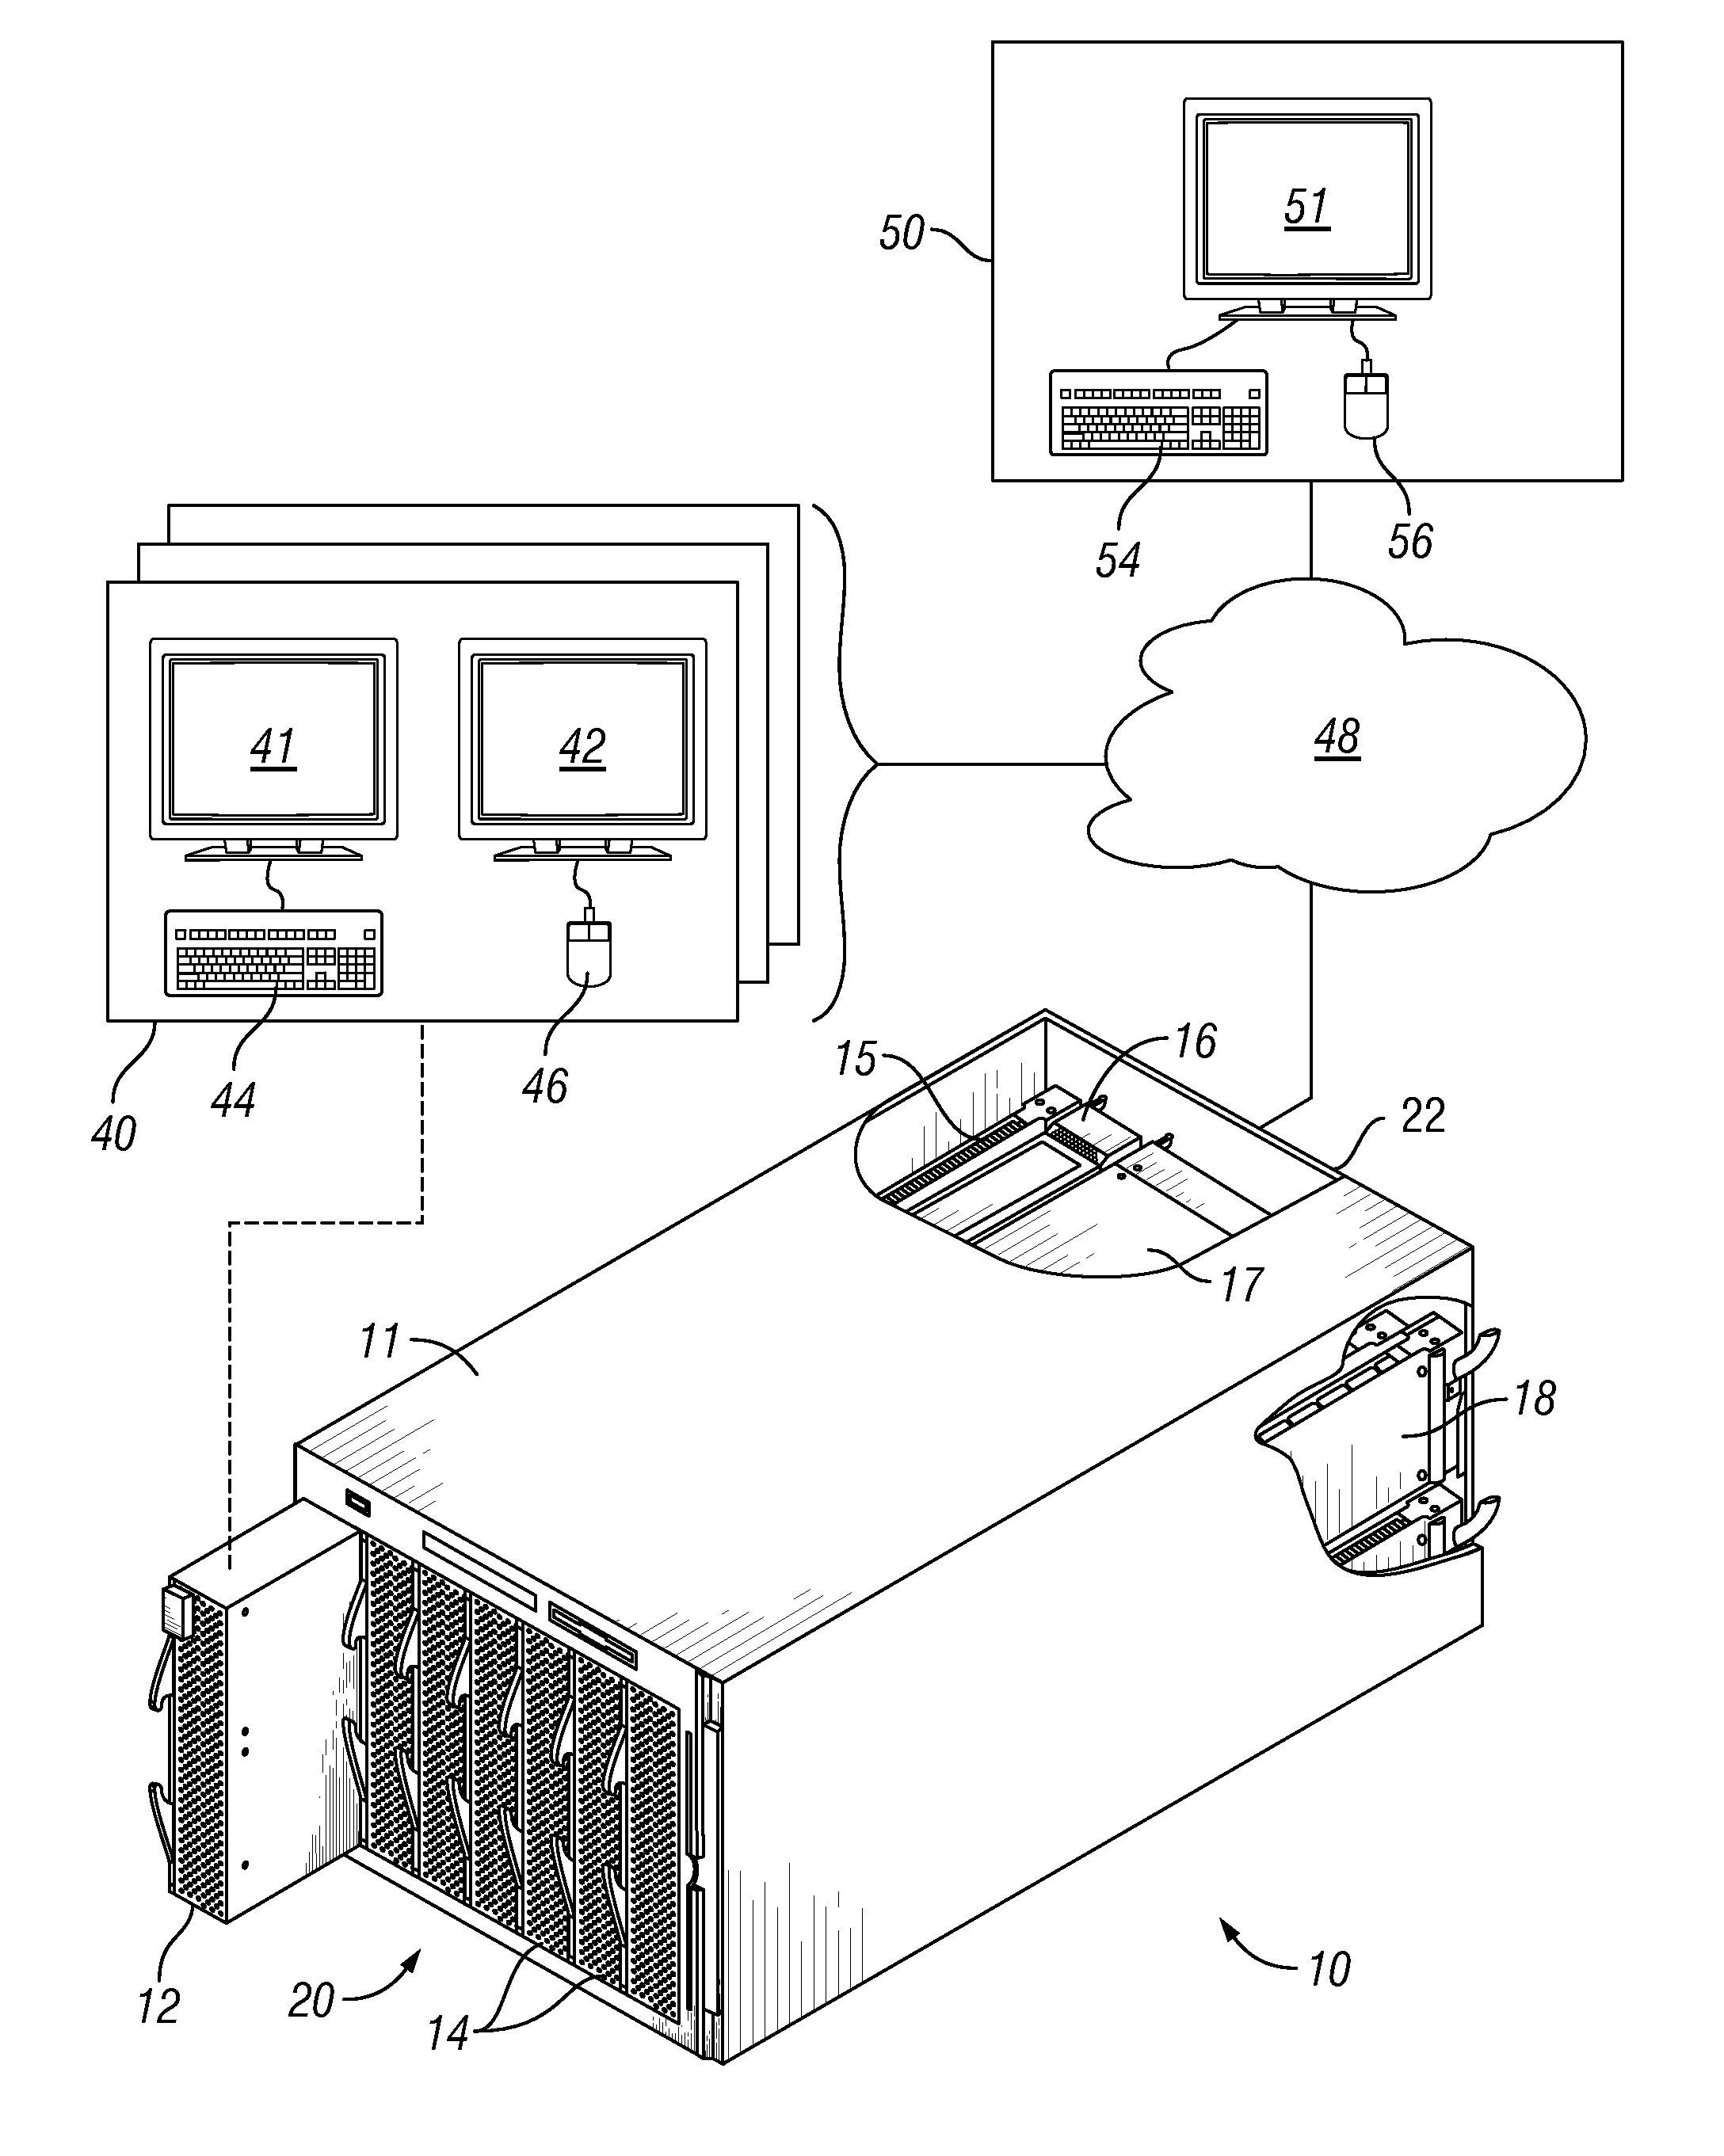 Automatic adjustment of display settings for remote viewing by an administrator